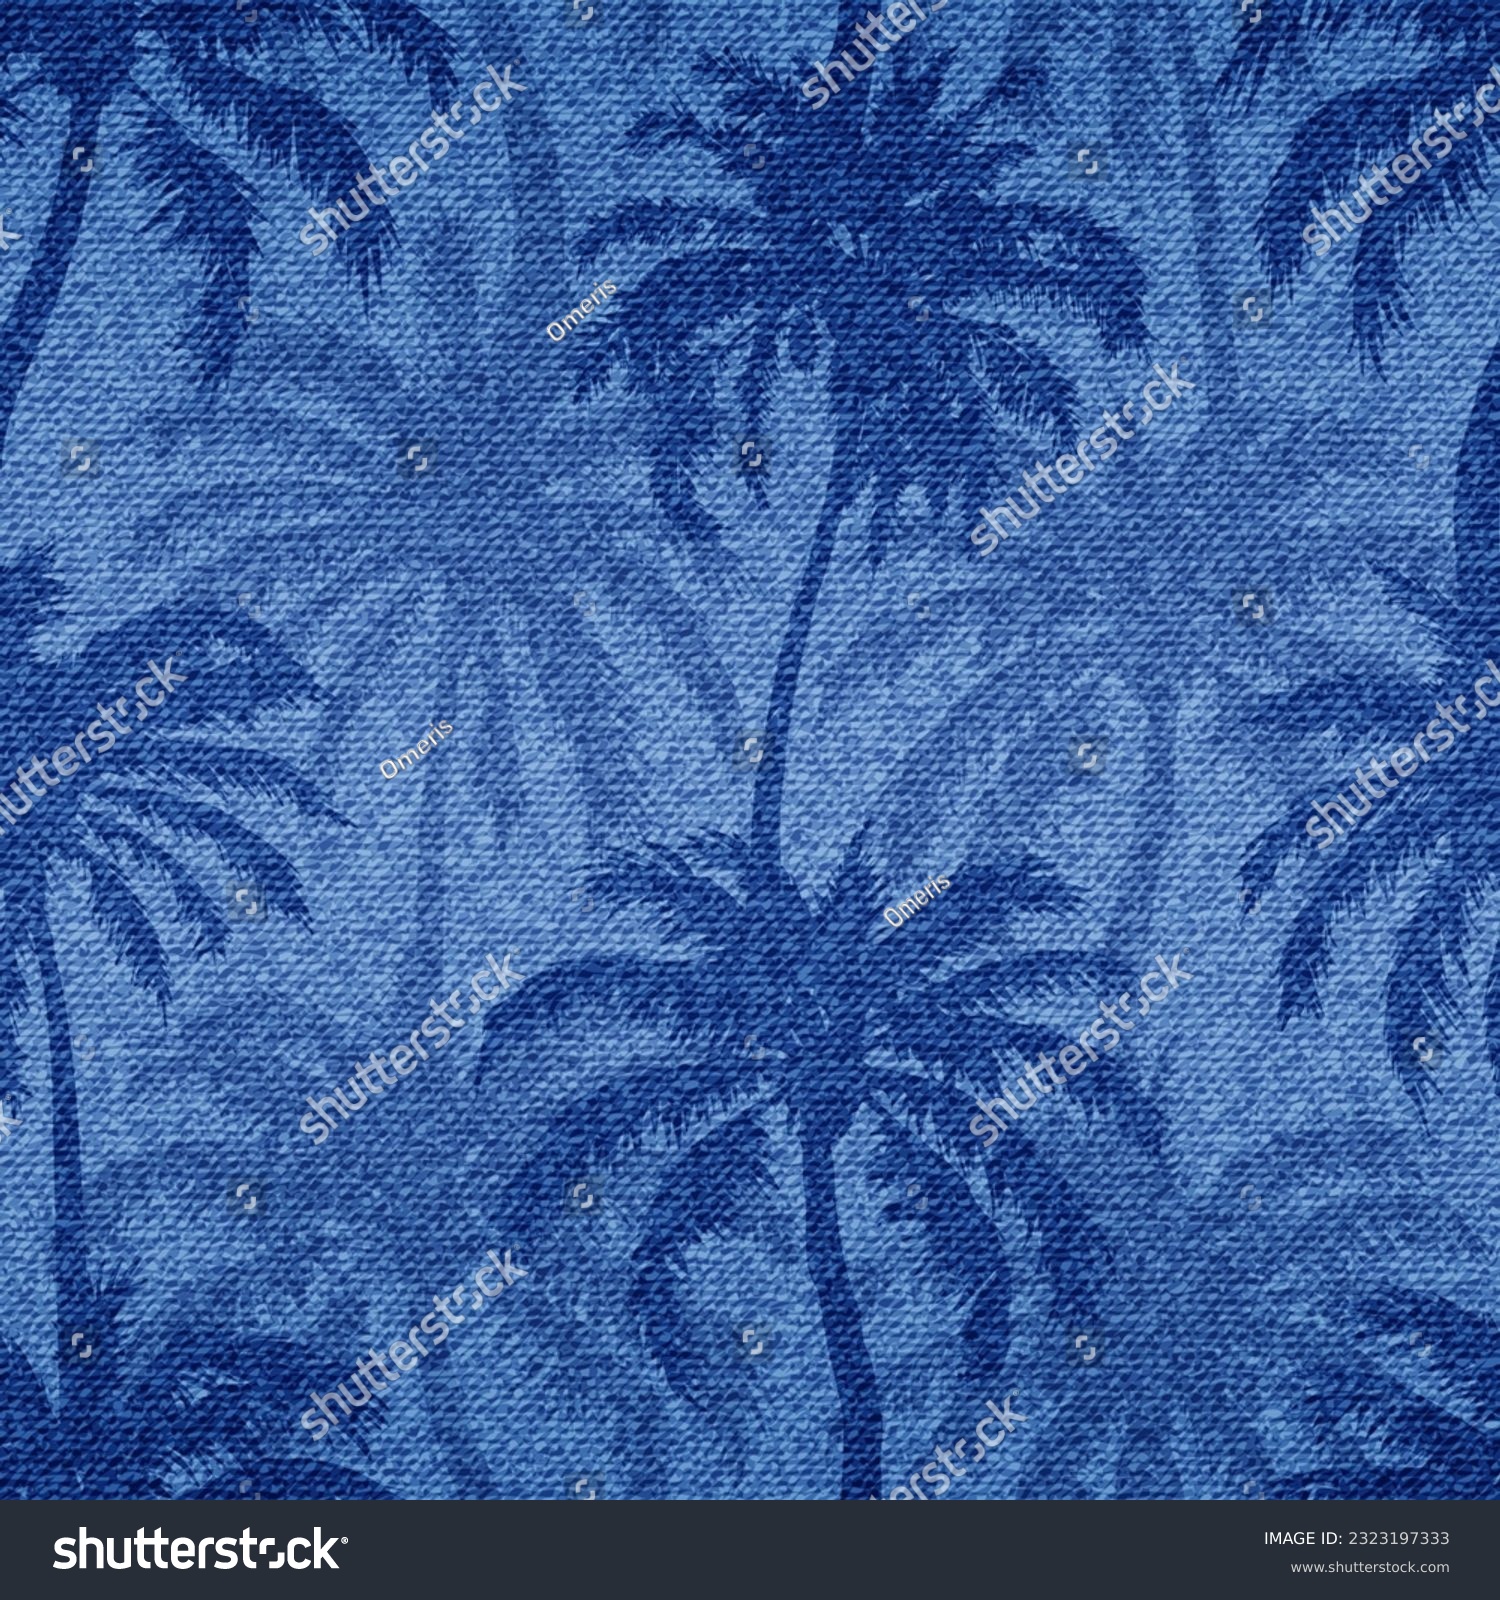 SVG of Palm seamless pattern. Repeated palm trees patern. Silhouette coconut tree. Denim beach background. Repeating tropical texture for design summer prints. Repeat coconuts palmtree. Vector illustration svg